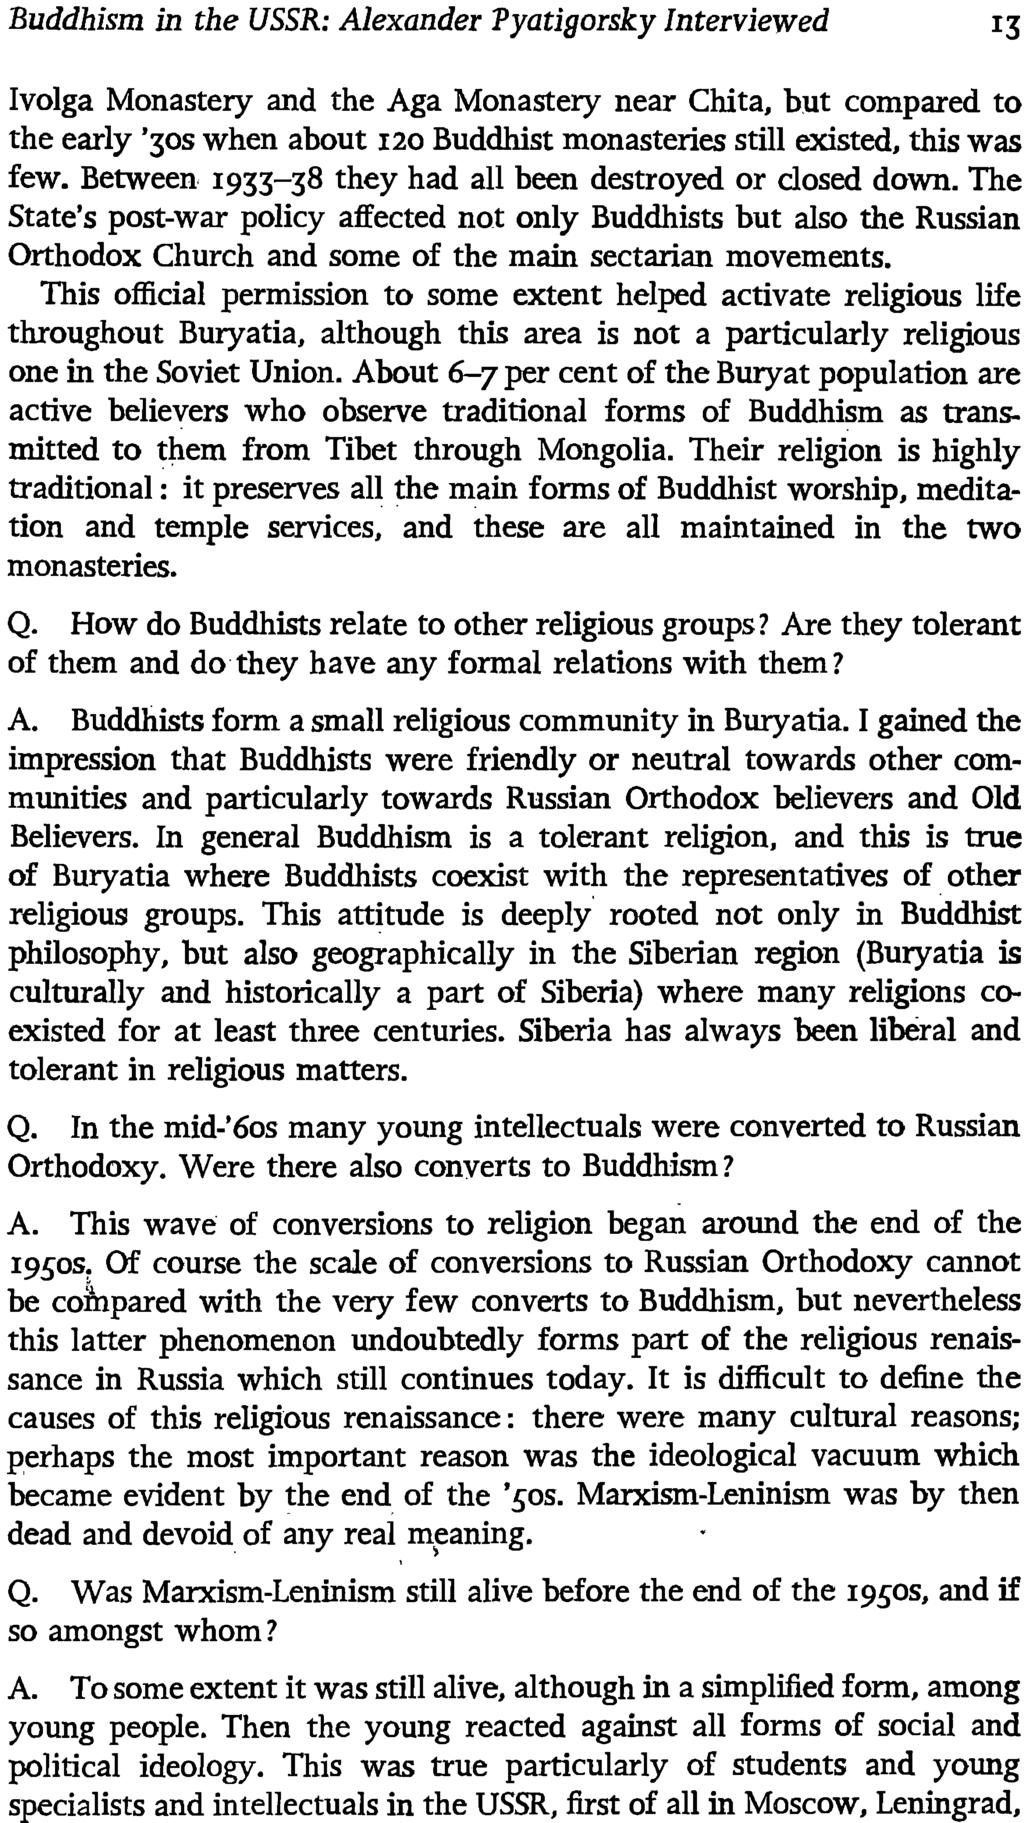 Buddhism in the USSR: Alexander Pyatigorsky Interviewed Ivolga Monastery and the Aga Monastery near Chita, but compared to the early '30S when about I20 Buddhist monasteries still existed, this was